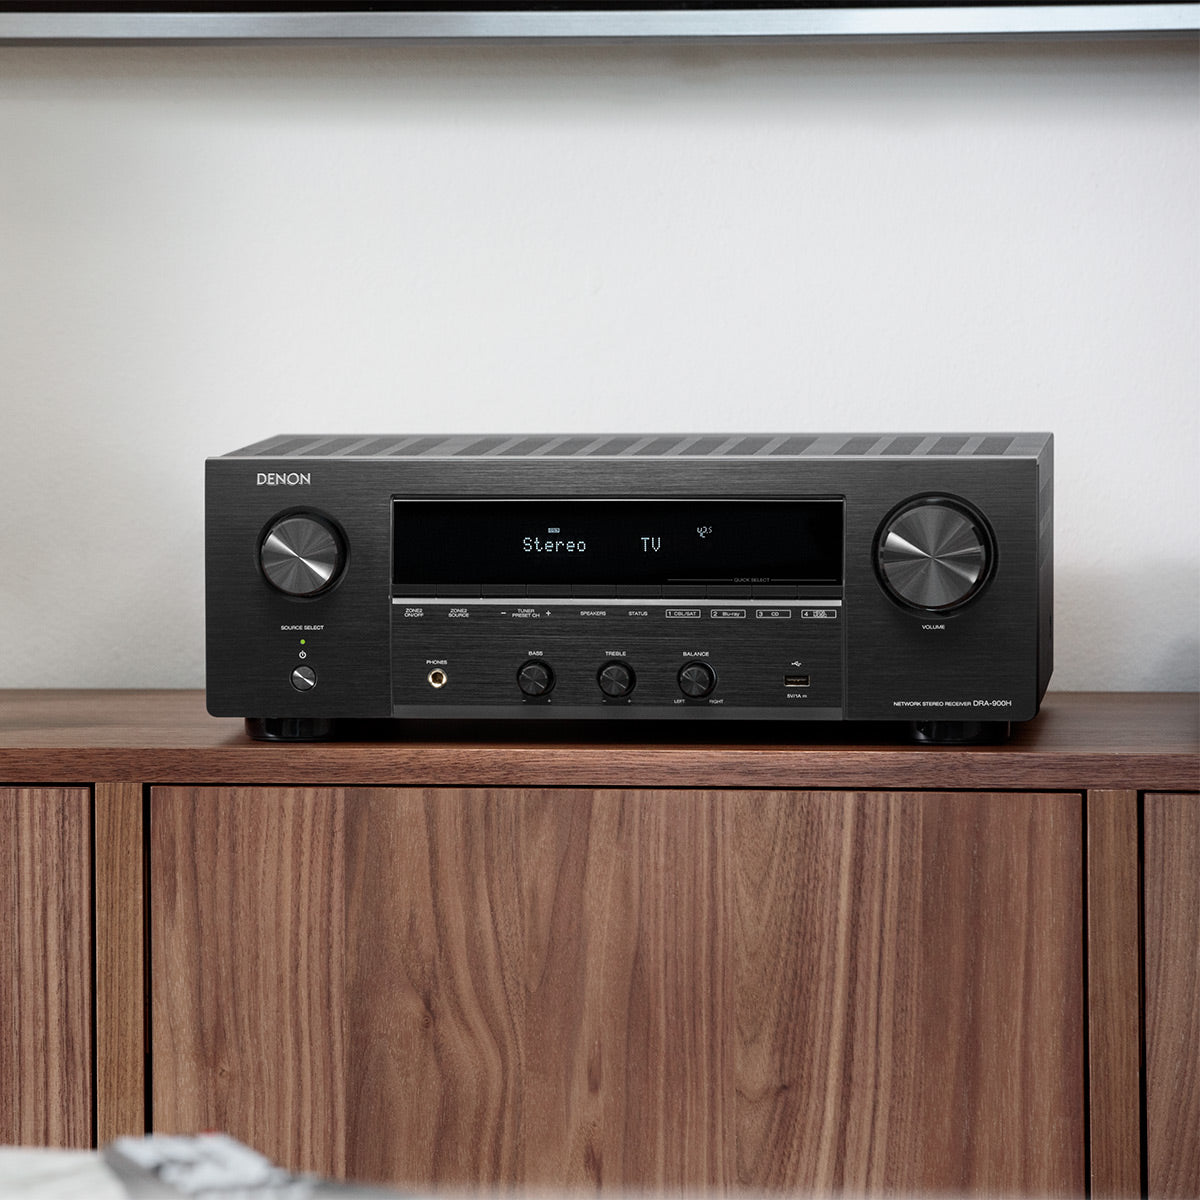 AV Stereo Channel 2.1 Built-In 8K with Denon | Wide HEOS Stereo World Receiver DRA-900H